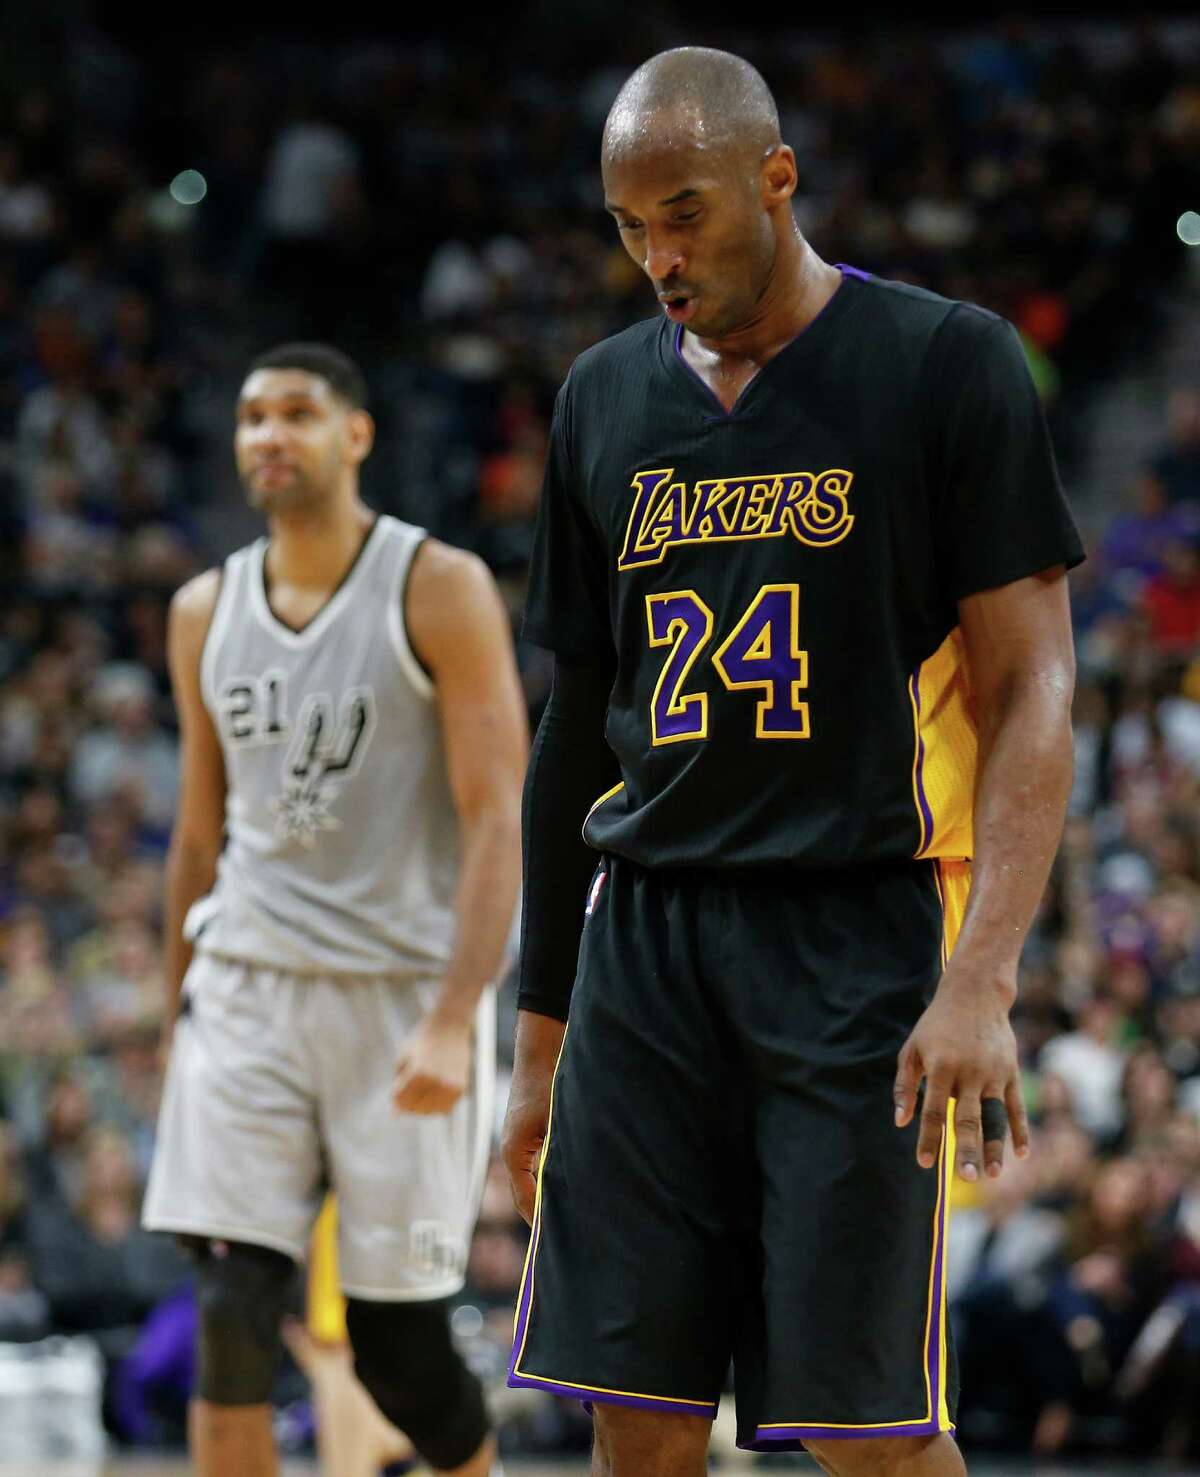 Los Angeles Lakers' Kobe Bryant (24) walks up the floor with Spurs' Tim Duncan (21) at the AT&T Center on Friday, Dec. 11, 2015. (Kin Man Hui/San Antonio Express-News)